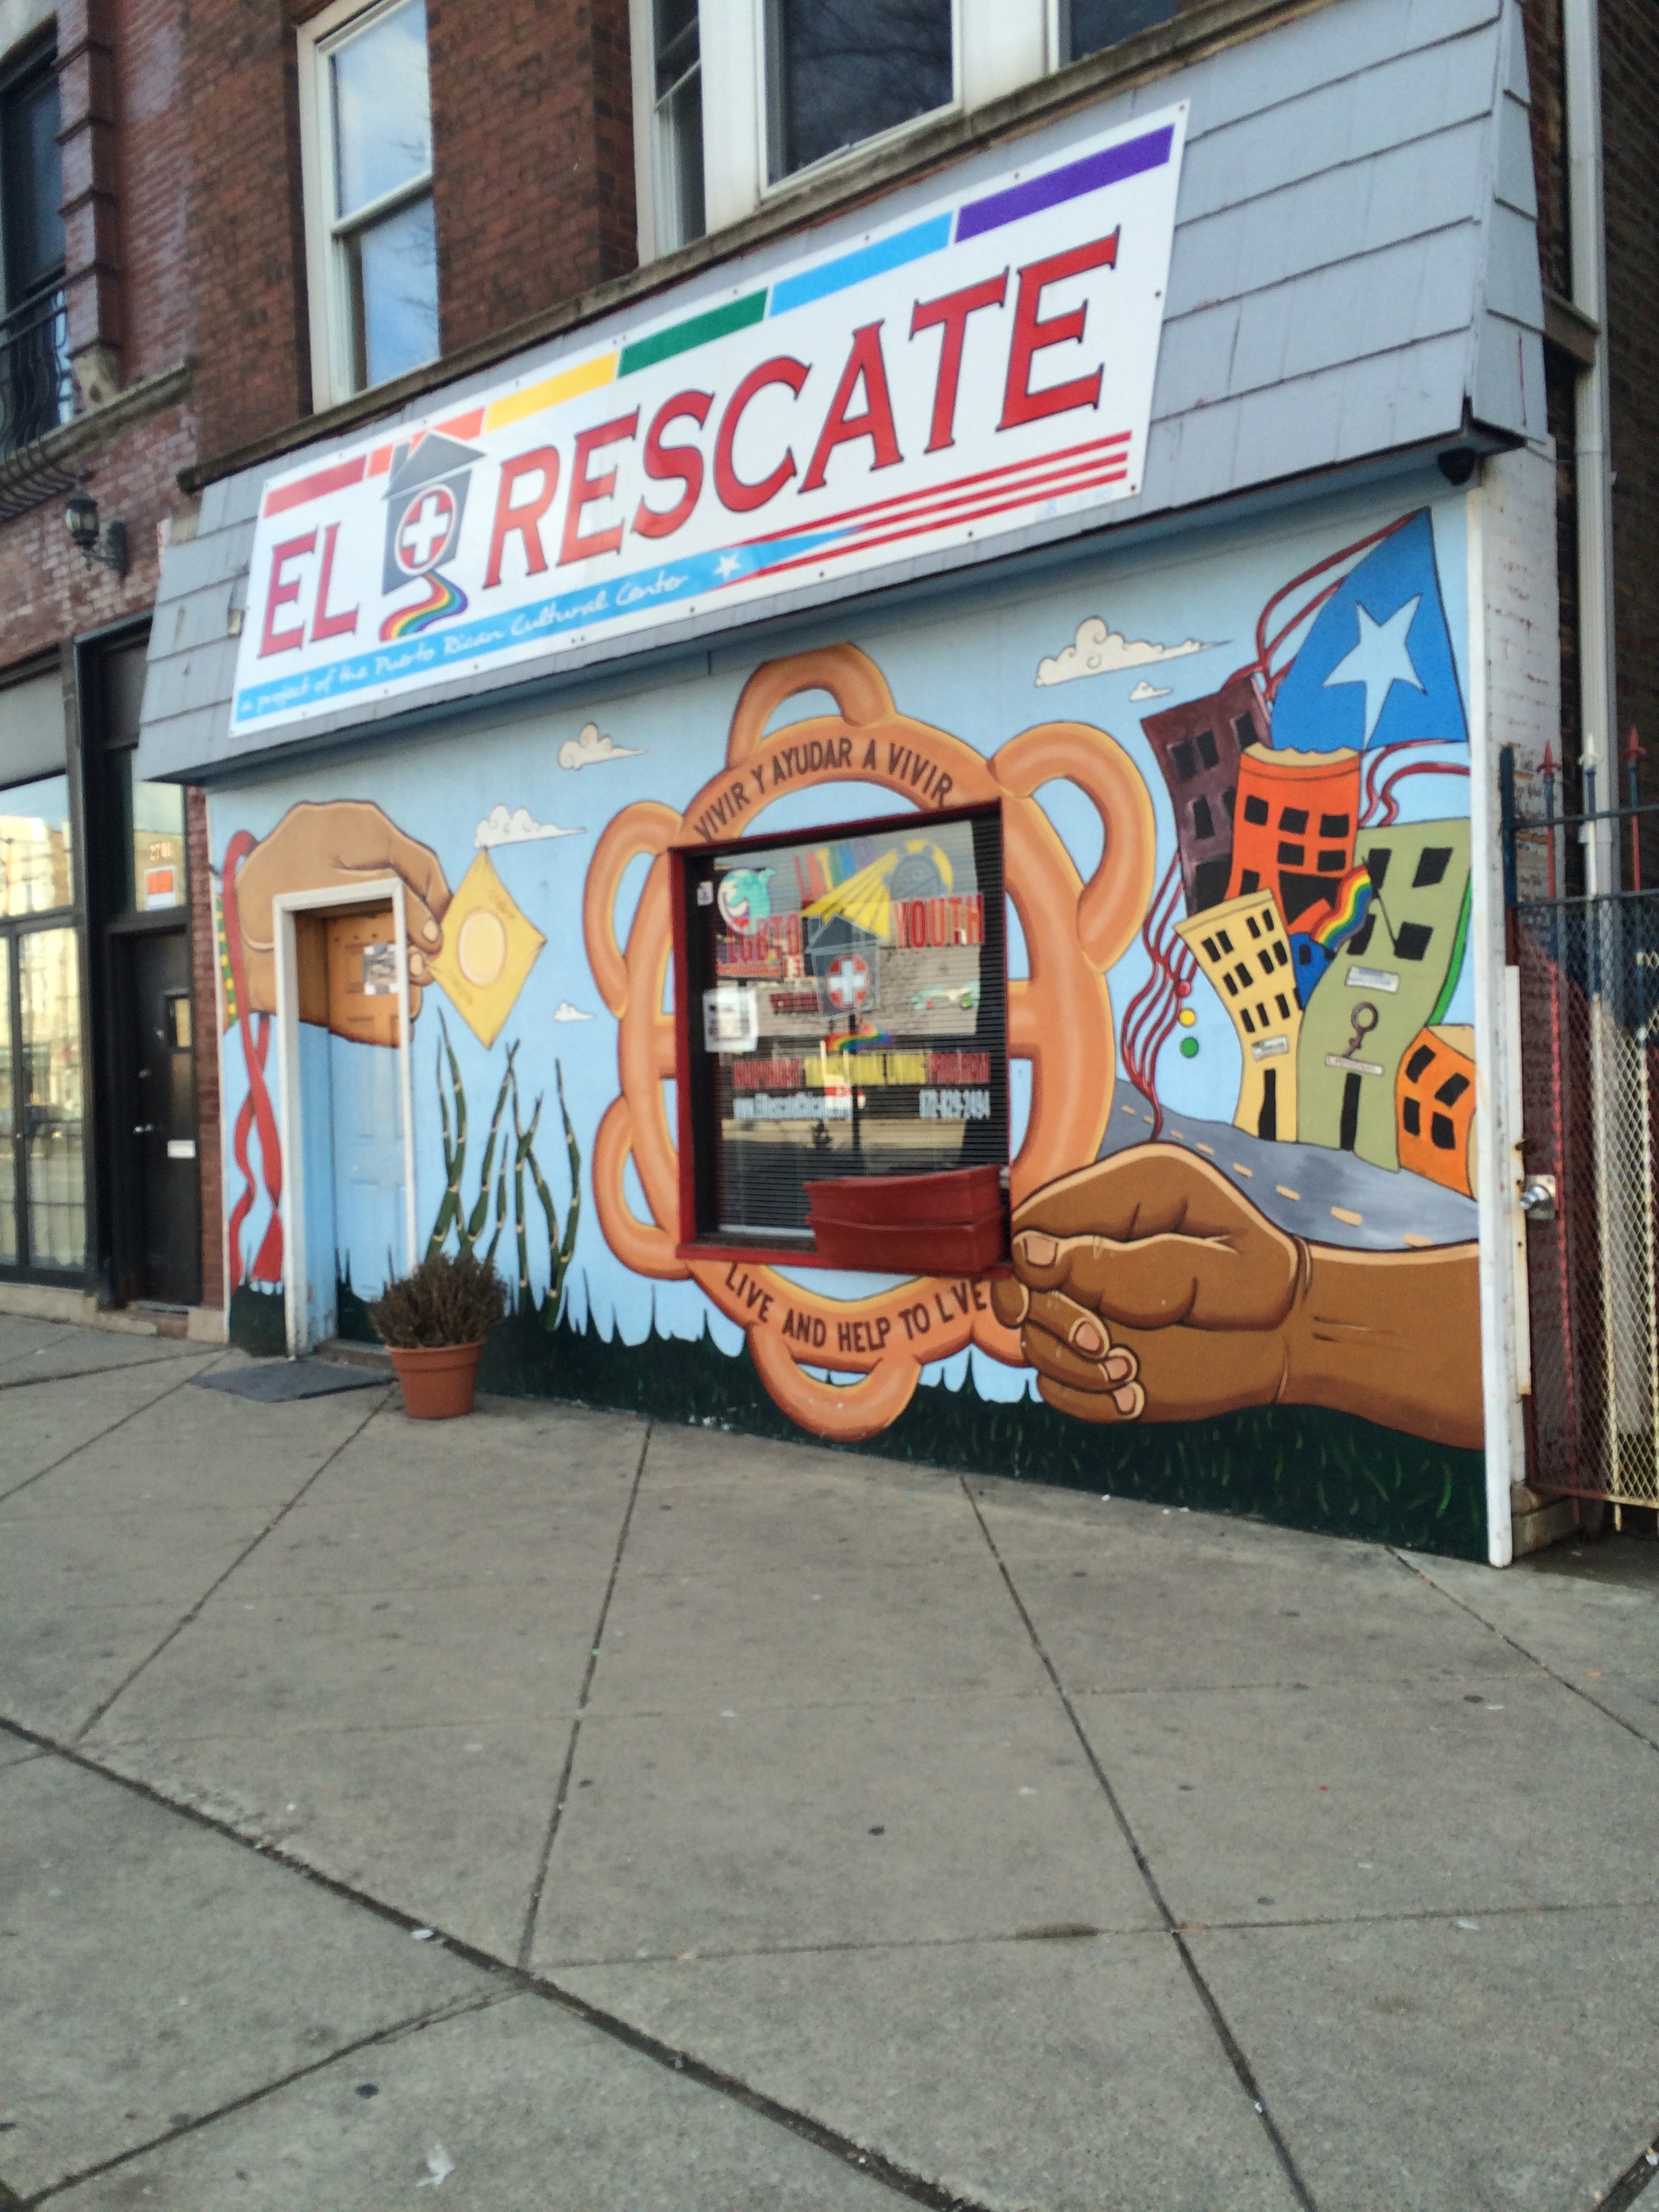  Any leftover soup from the event was donated to El Rescate in Humboldt Park so nothing went to waste. 